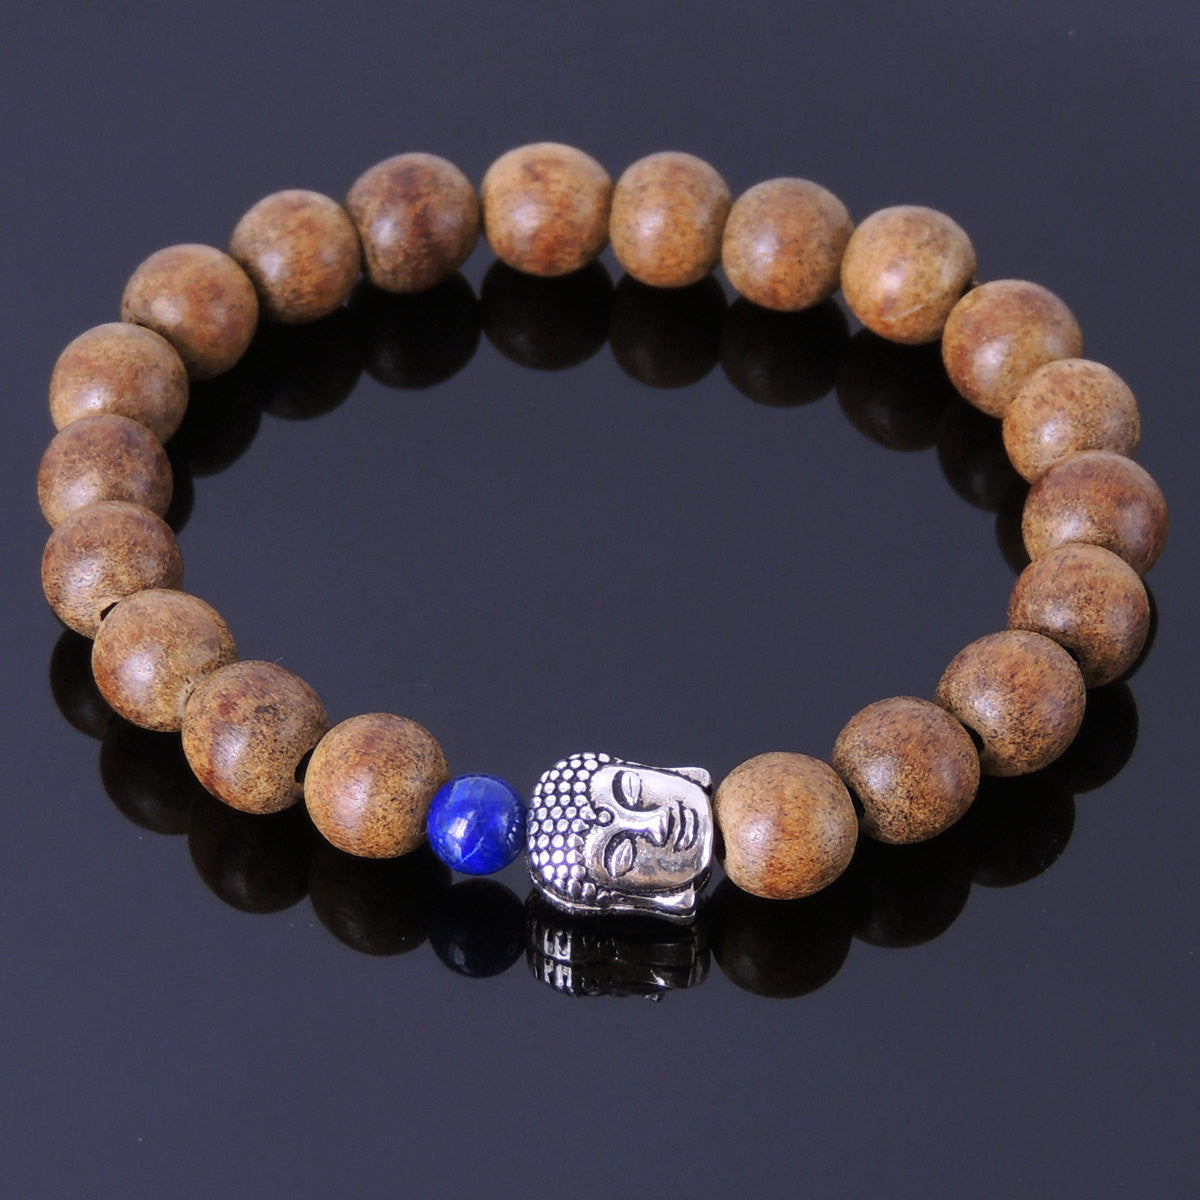 Lapis Lazuli & Agarwood Bracelet for Prayer & Meditation with S925 Sterling Silver Guanyin Buddha Protection Bead - Handmade by Gem & Silver BR215